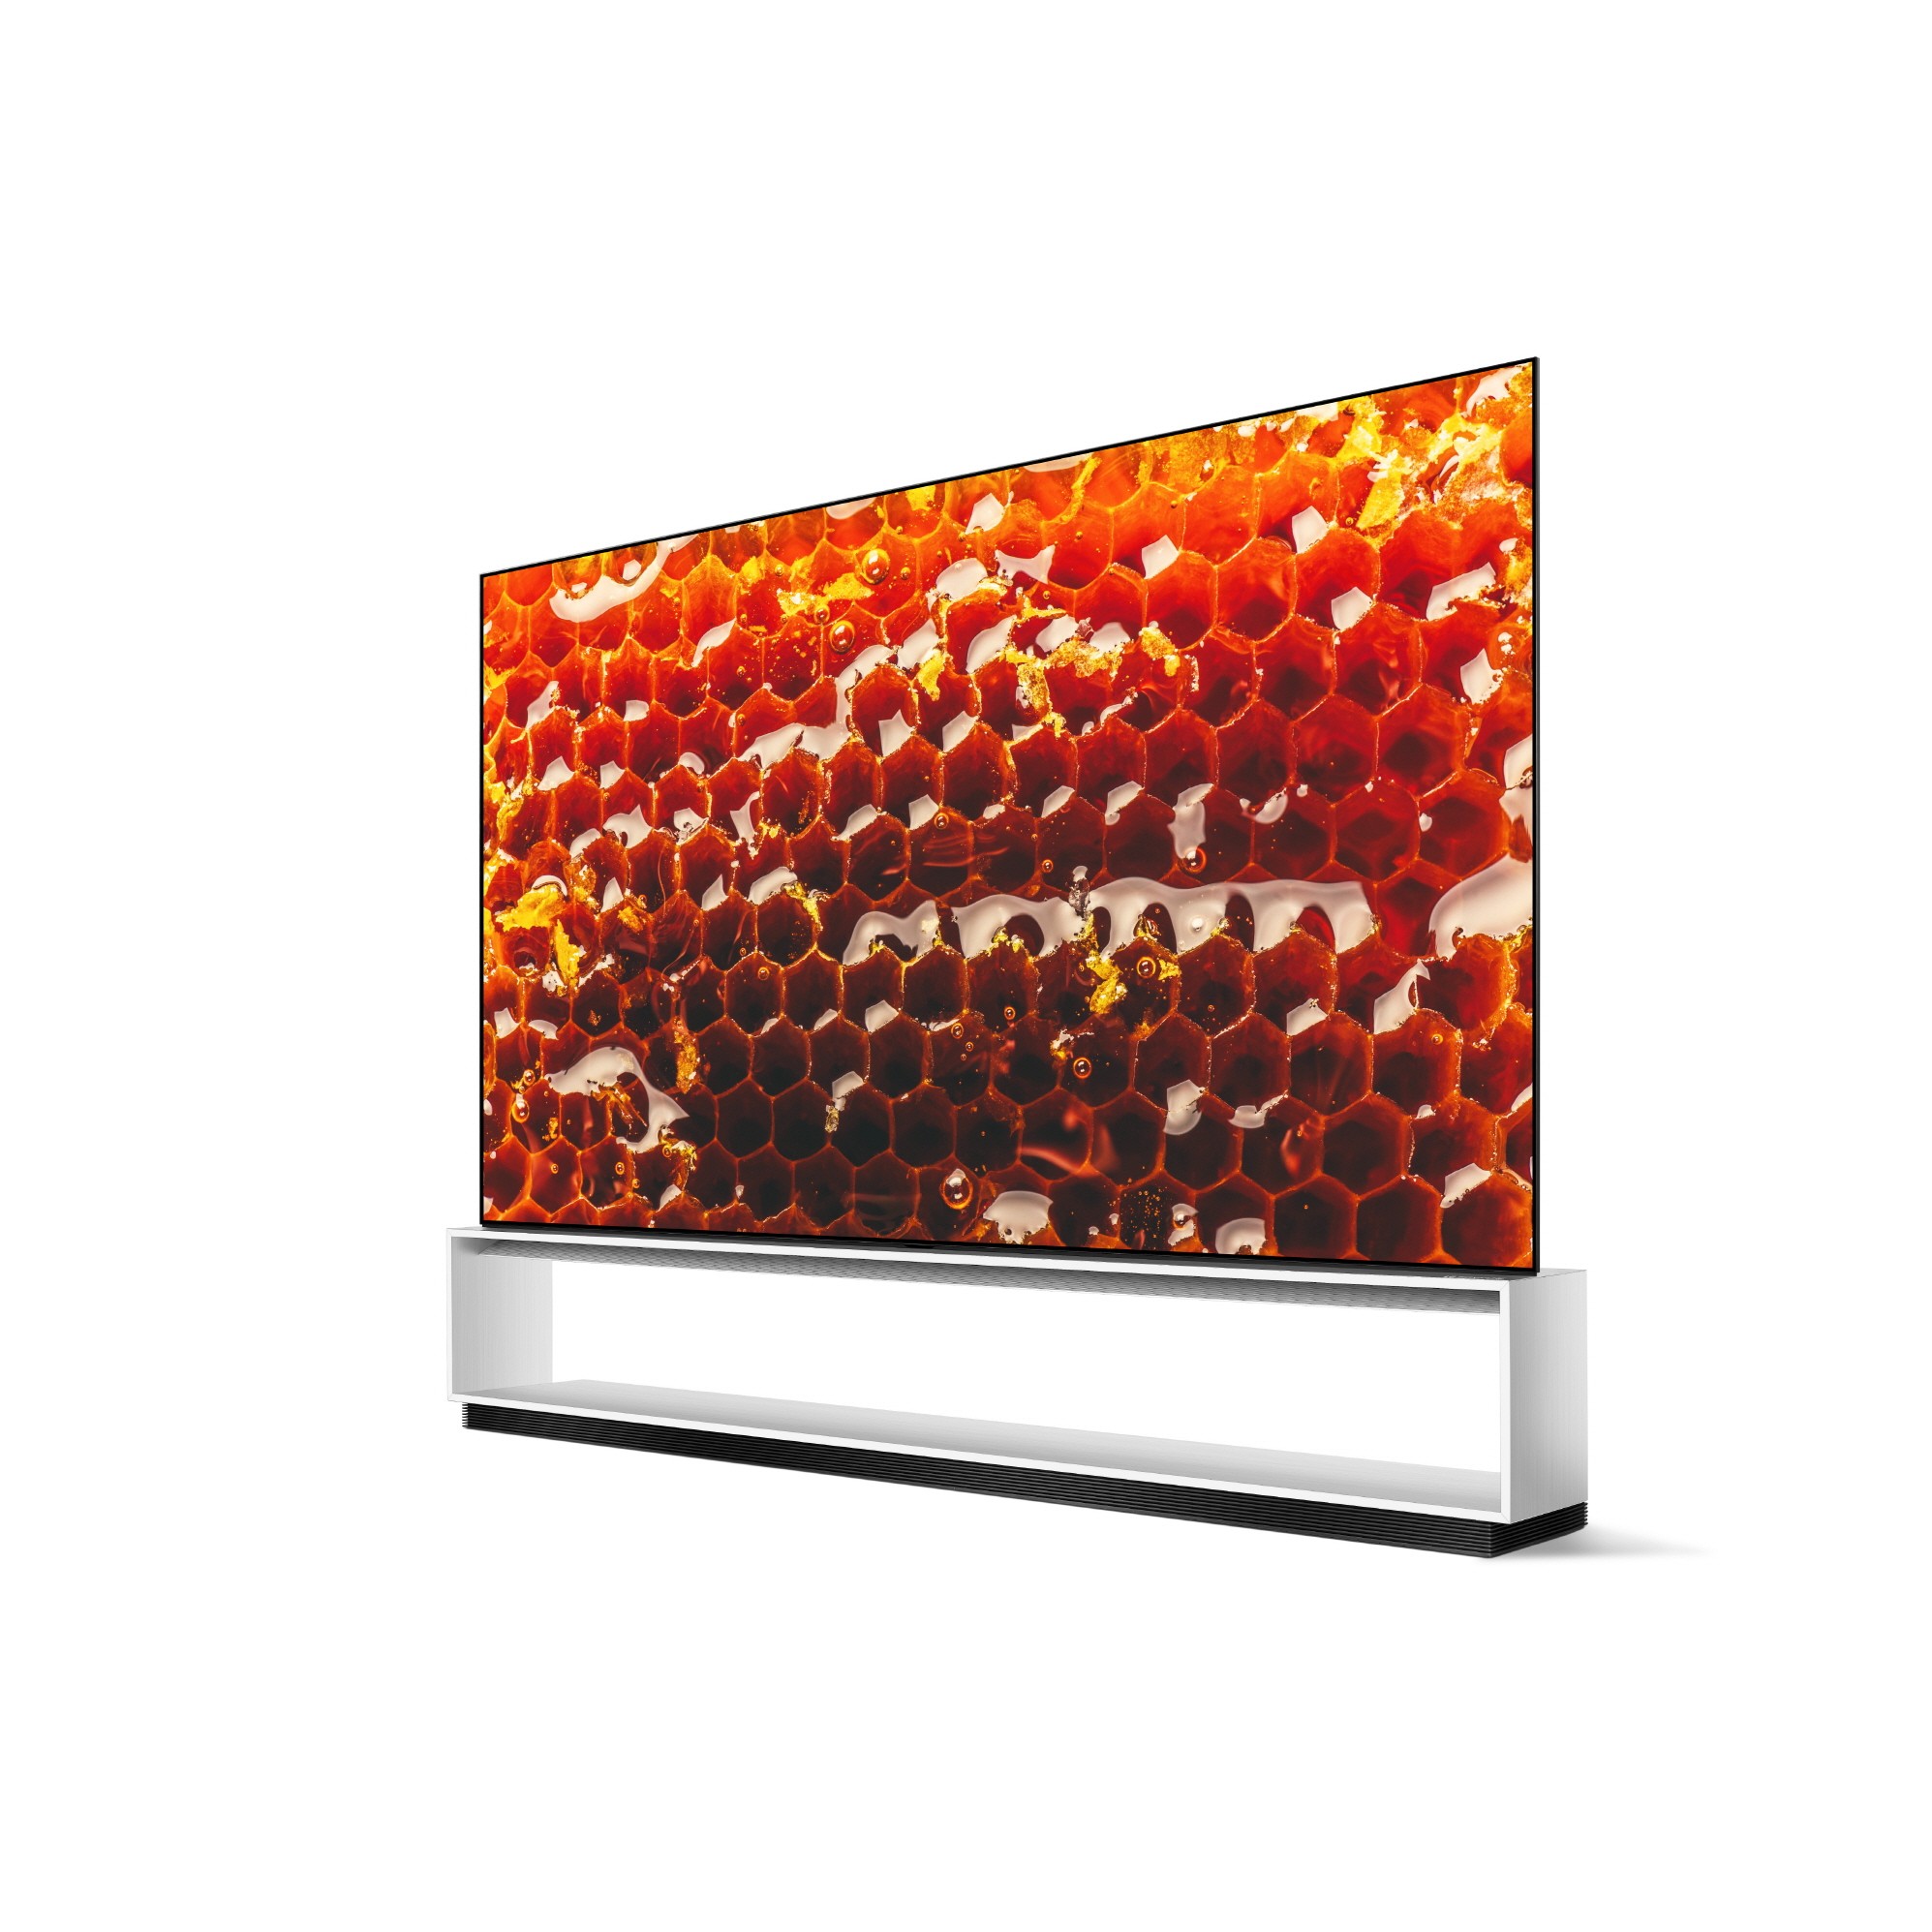 A right-side view of LG SIGNATURE OLED 8K TV model 88Z9 displaying a close-up picture of a honeycomb